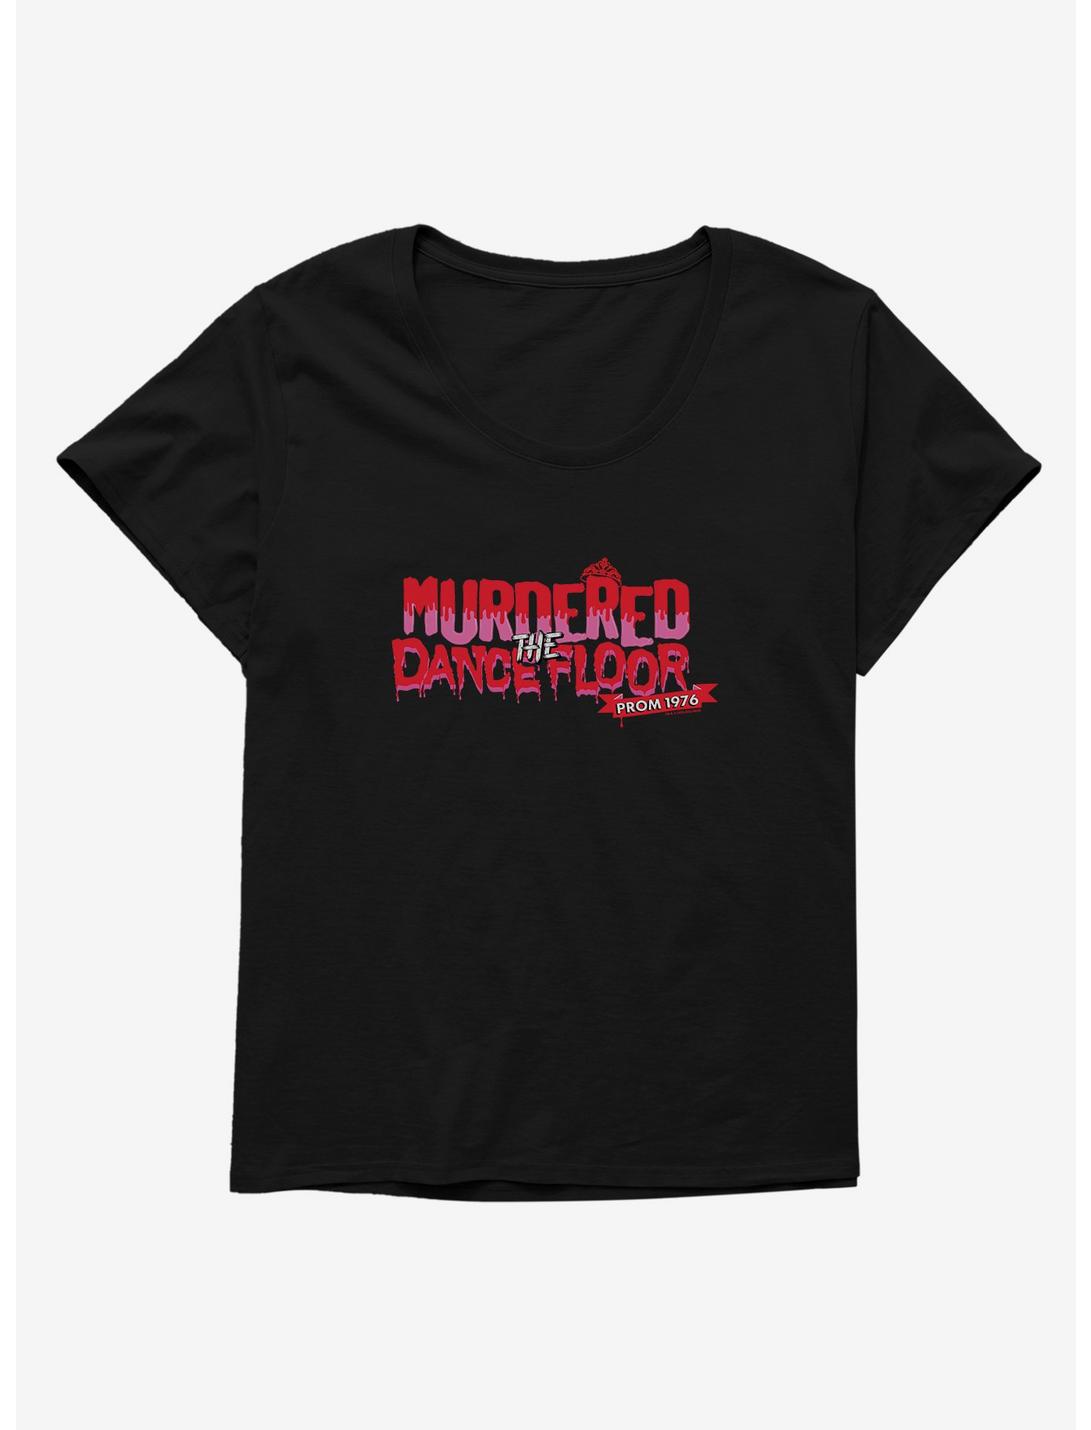 Carrie 1976 Murdered the Dance Floor Girls T-Shirt Plus Size, , hi-res